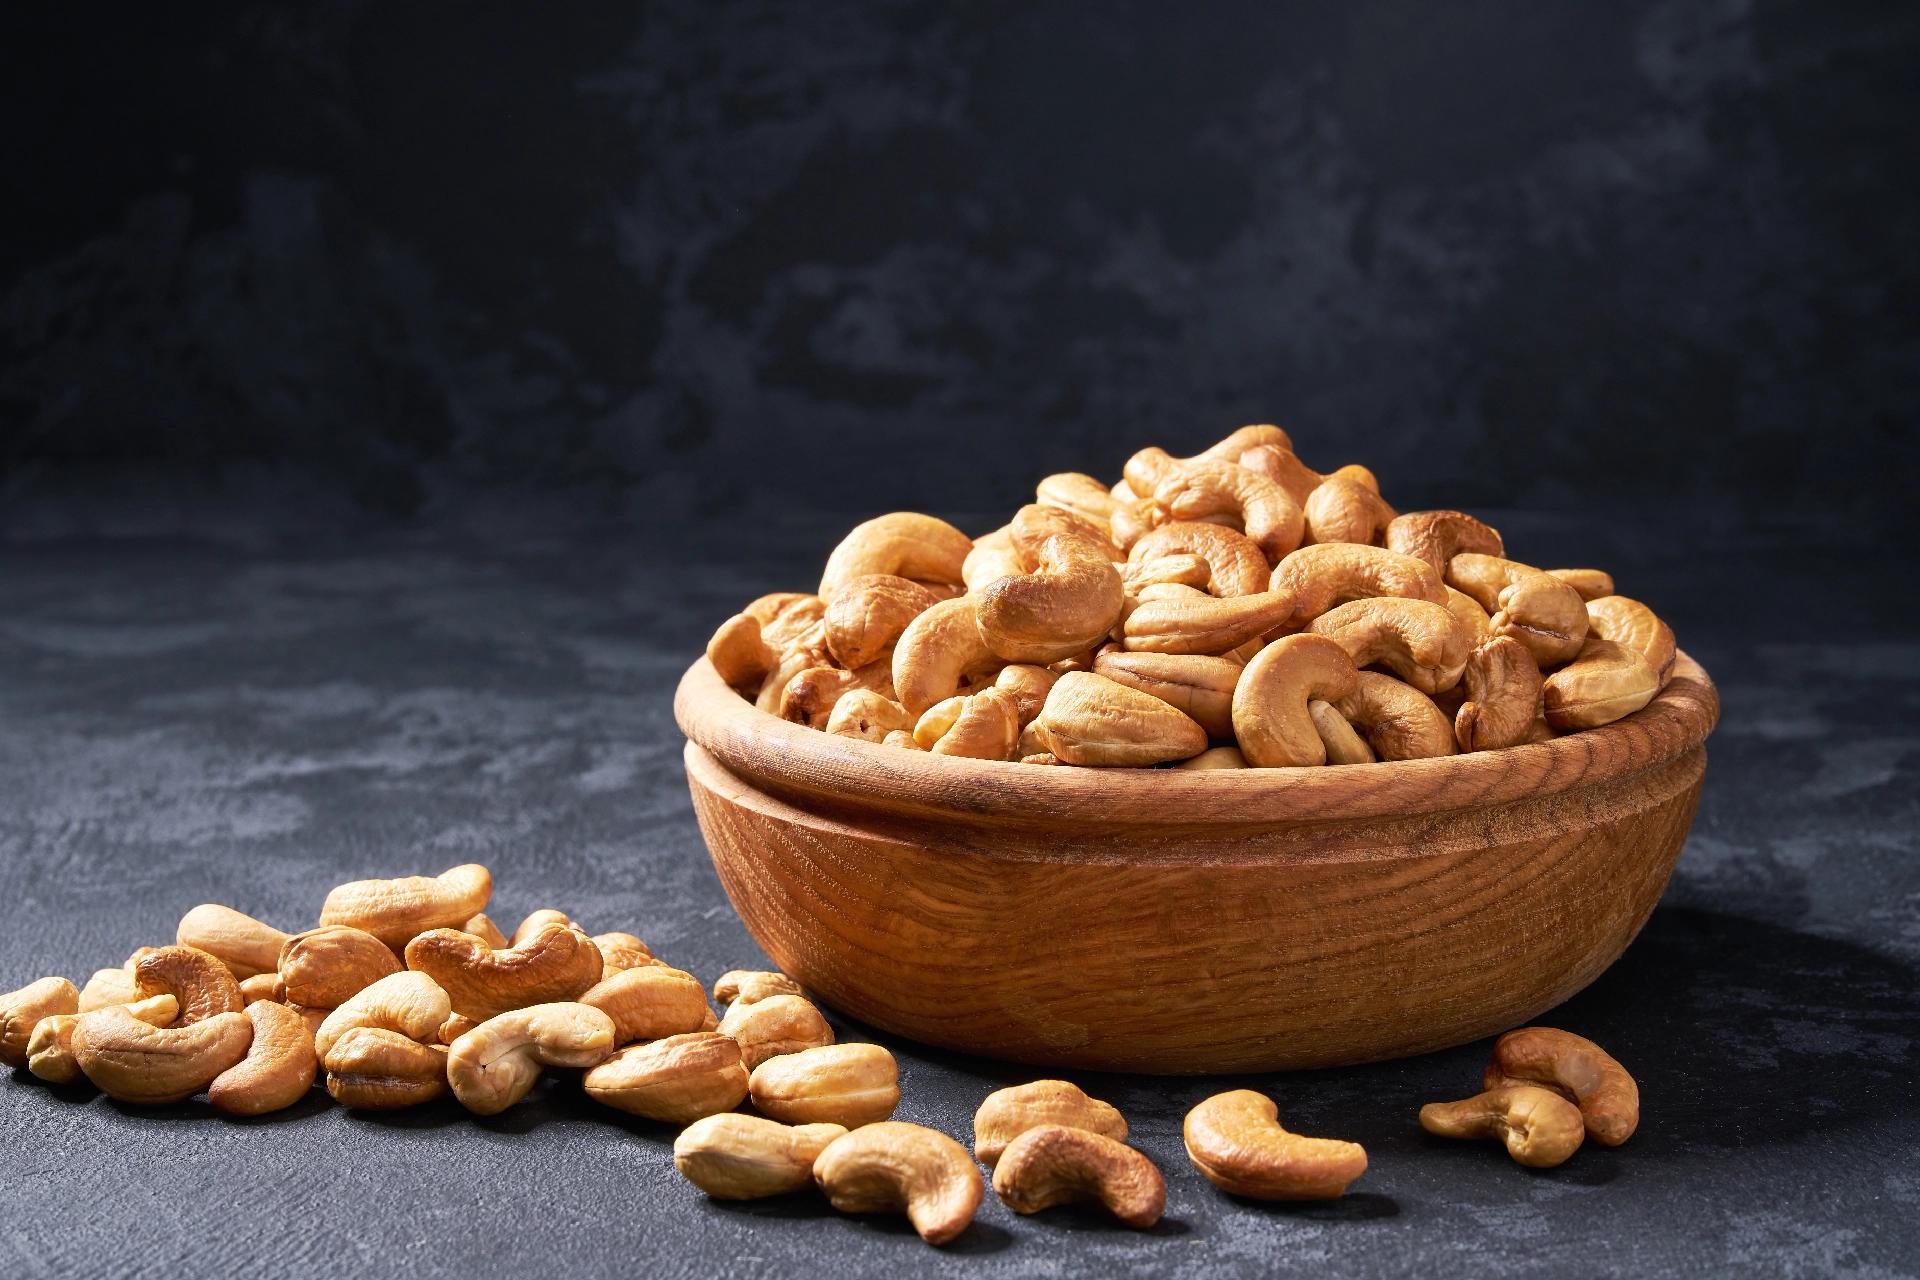 Cashews - Benefits, Nutritional Facts, and More